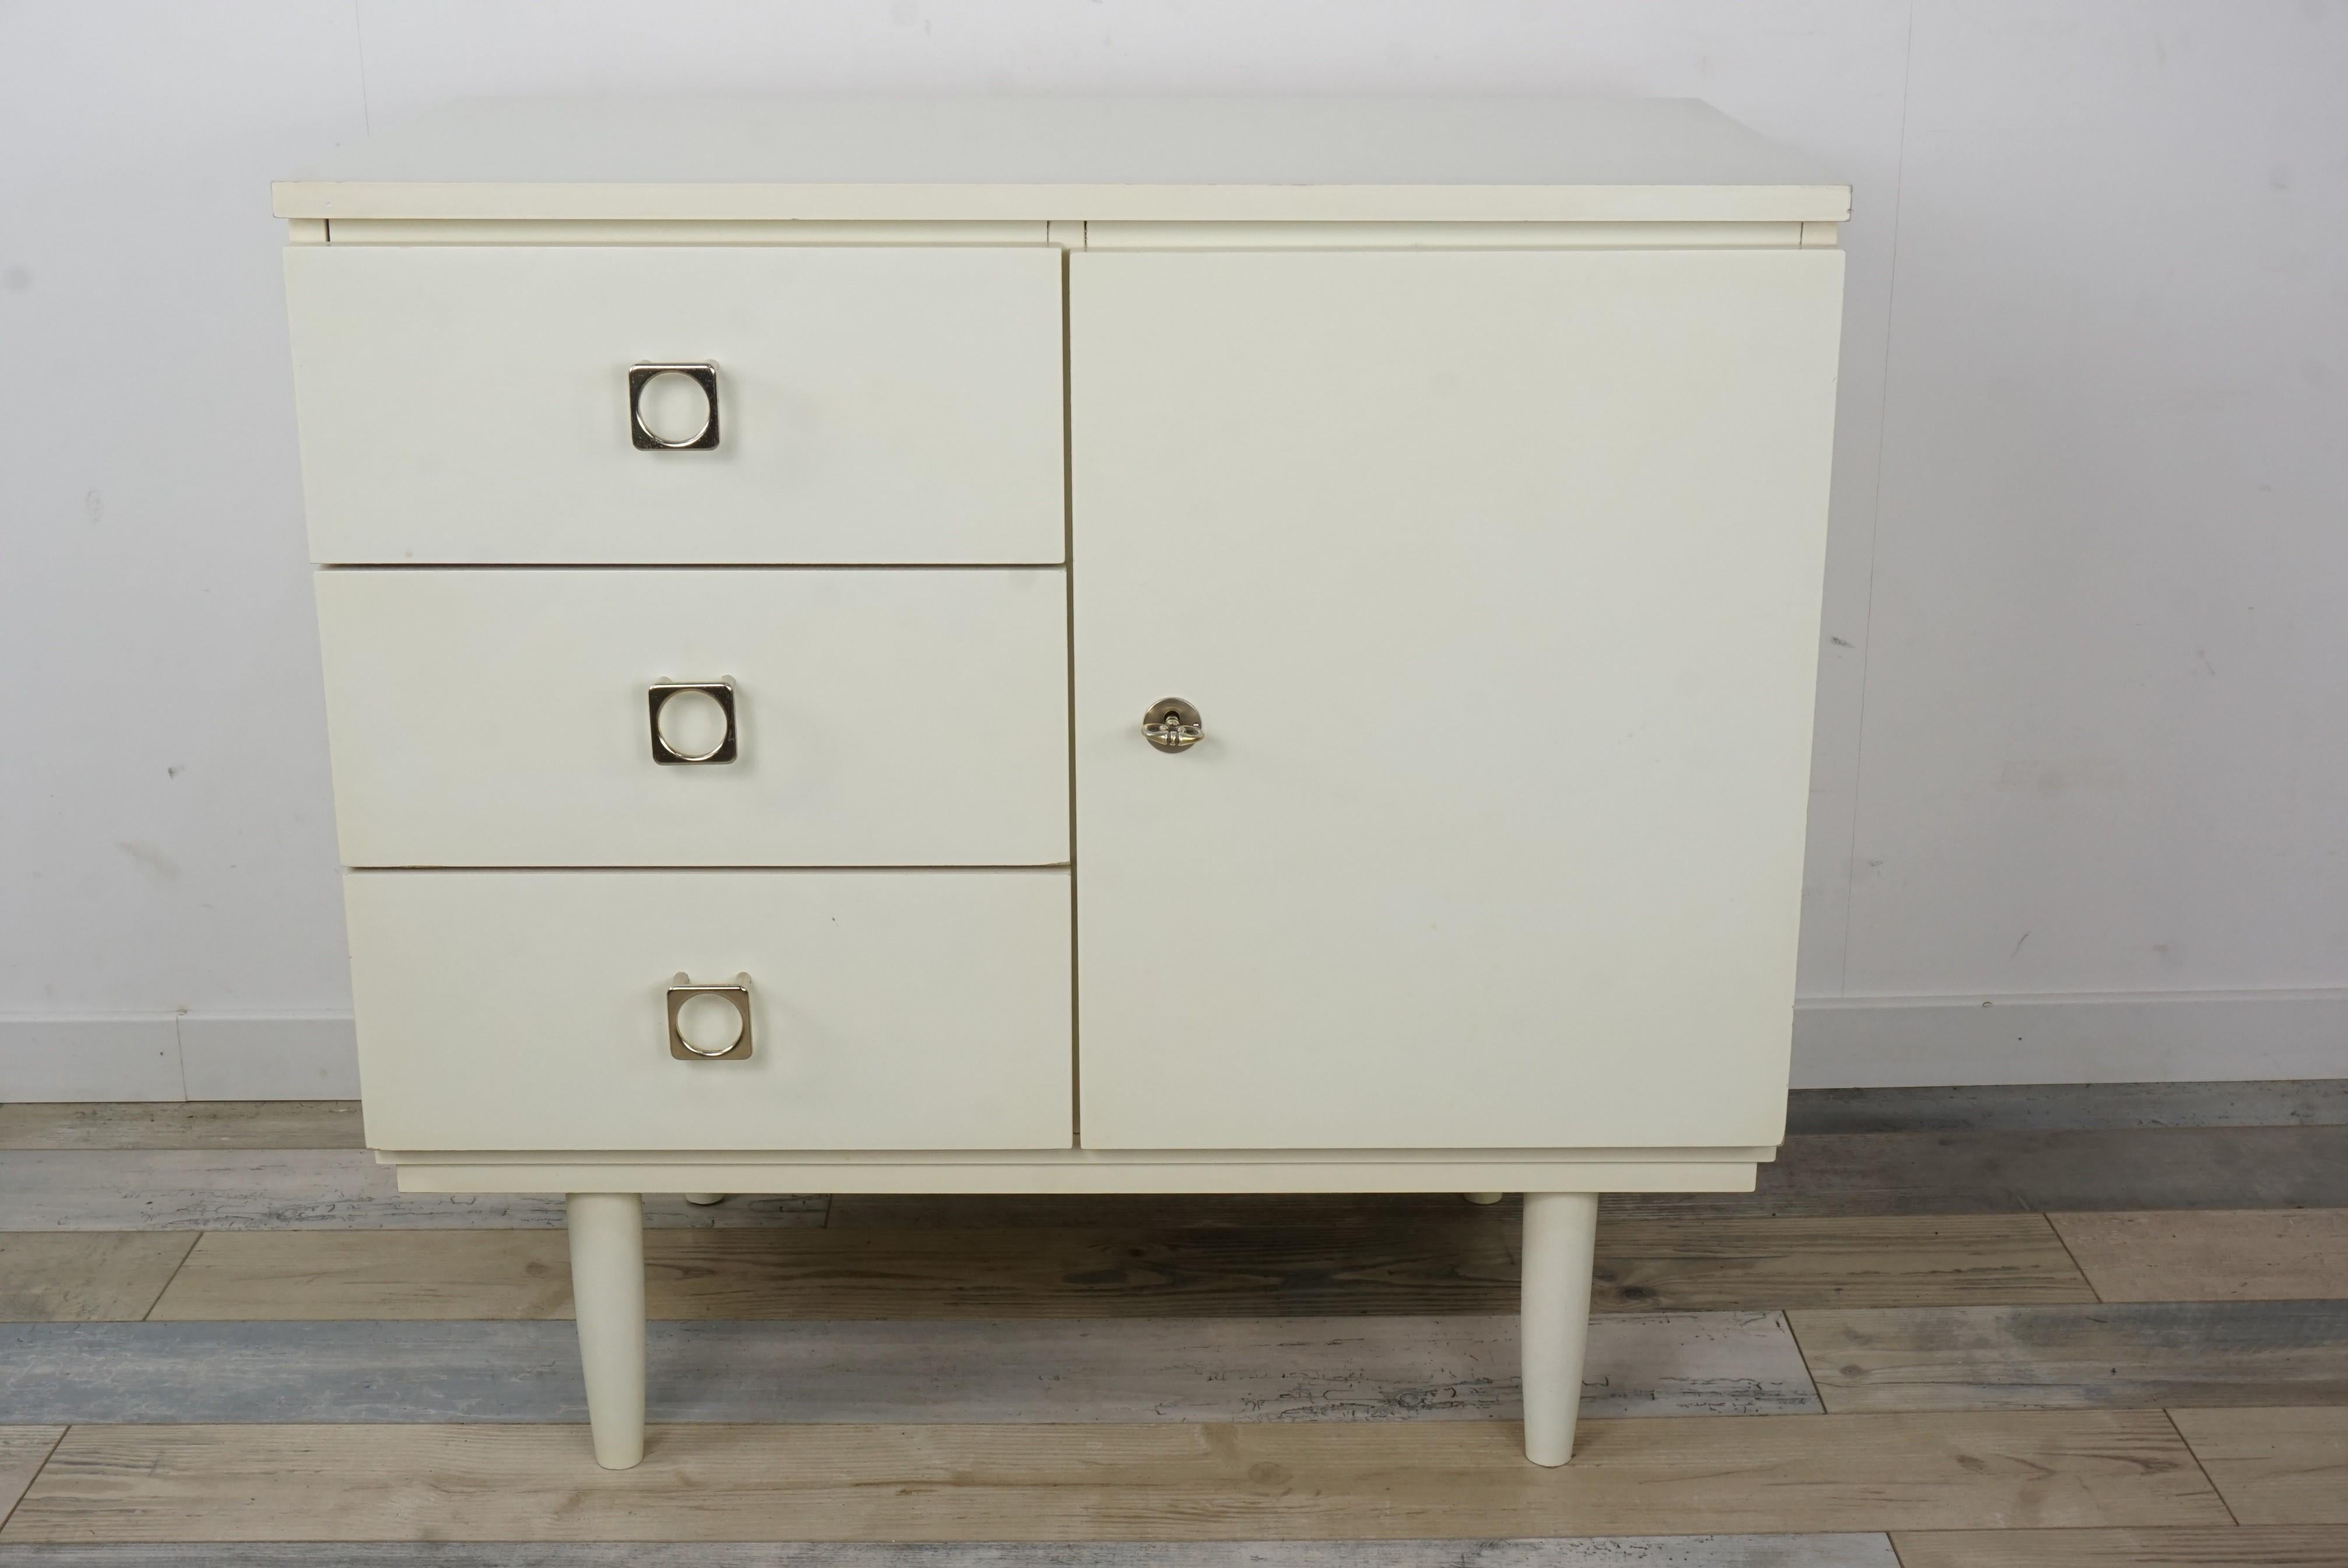 20th Century 1950s-1960s White Satin Lacquered Wooden Cabinet